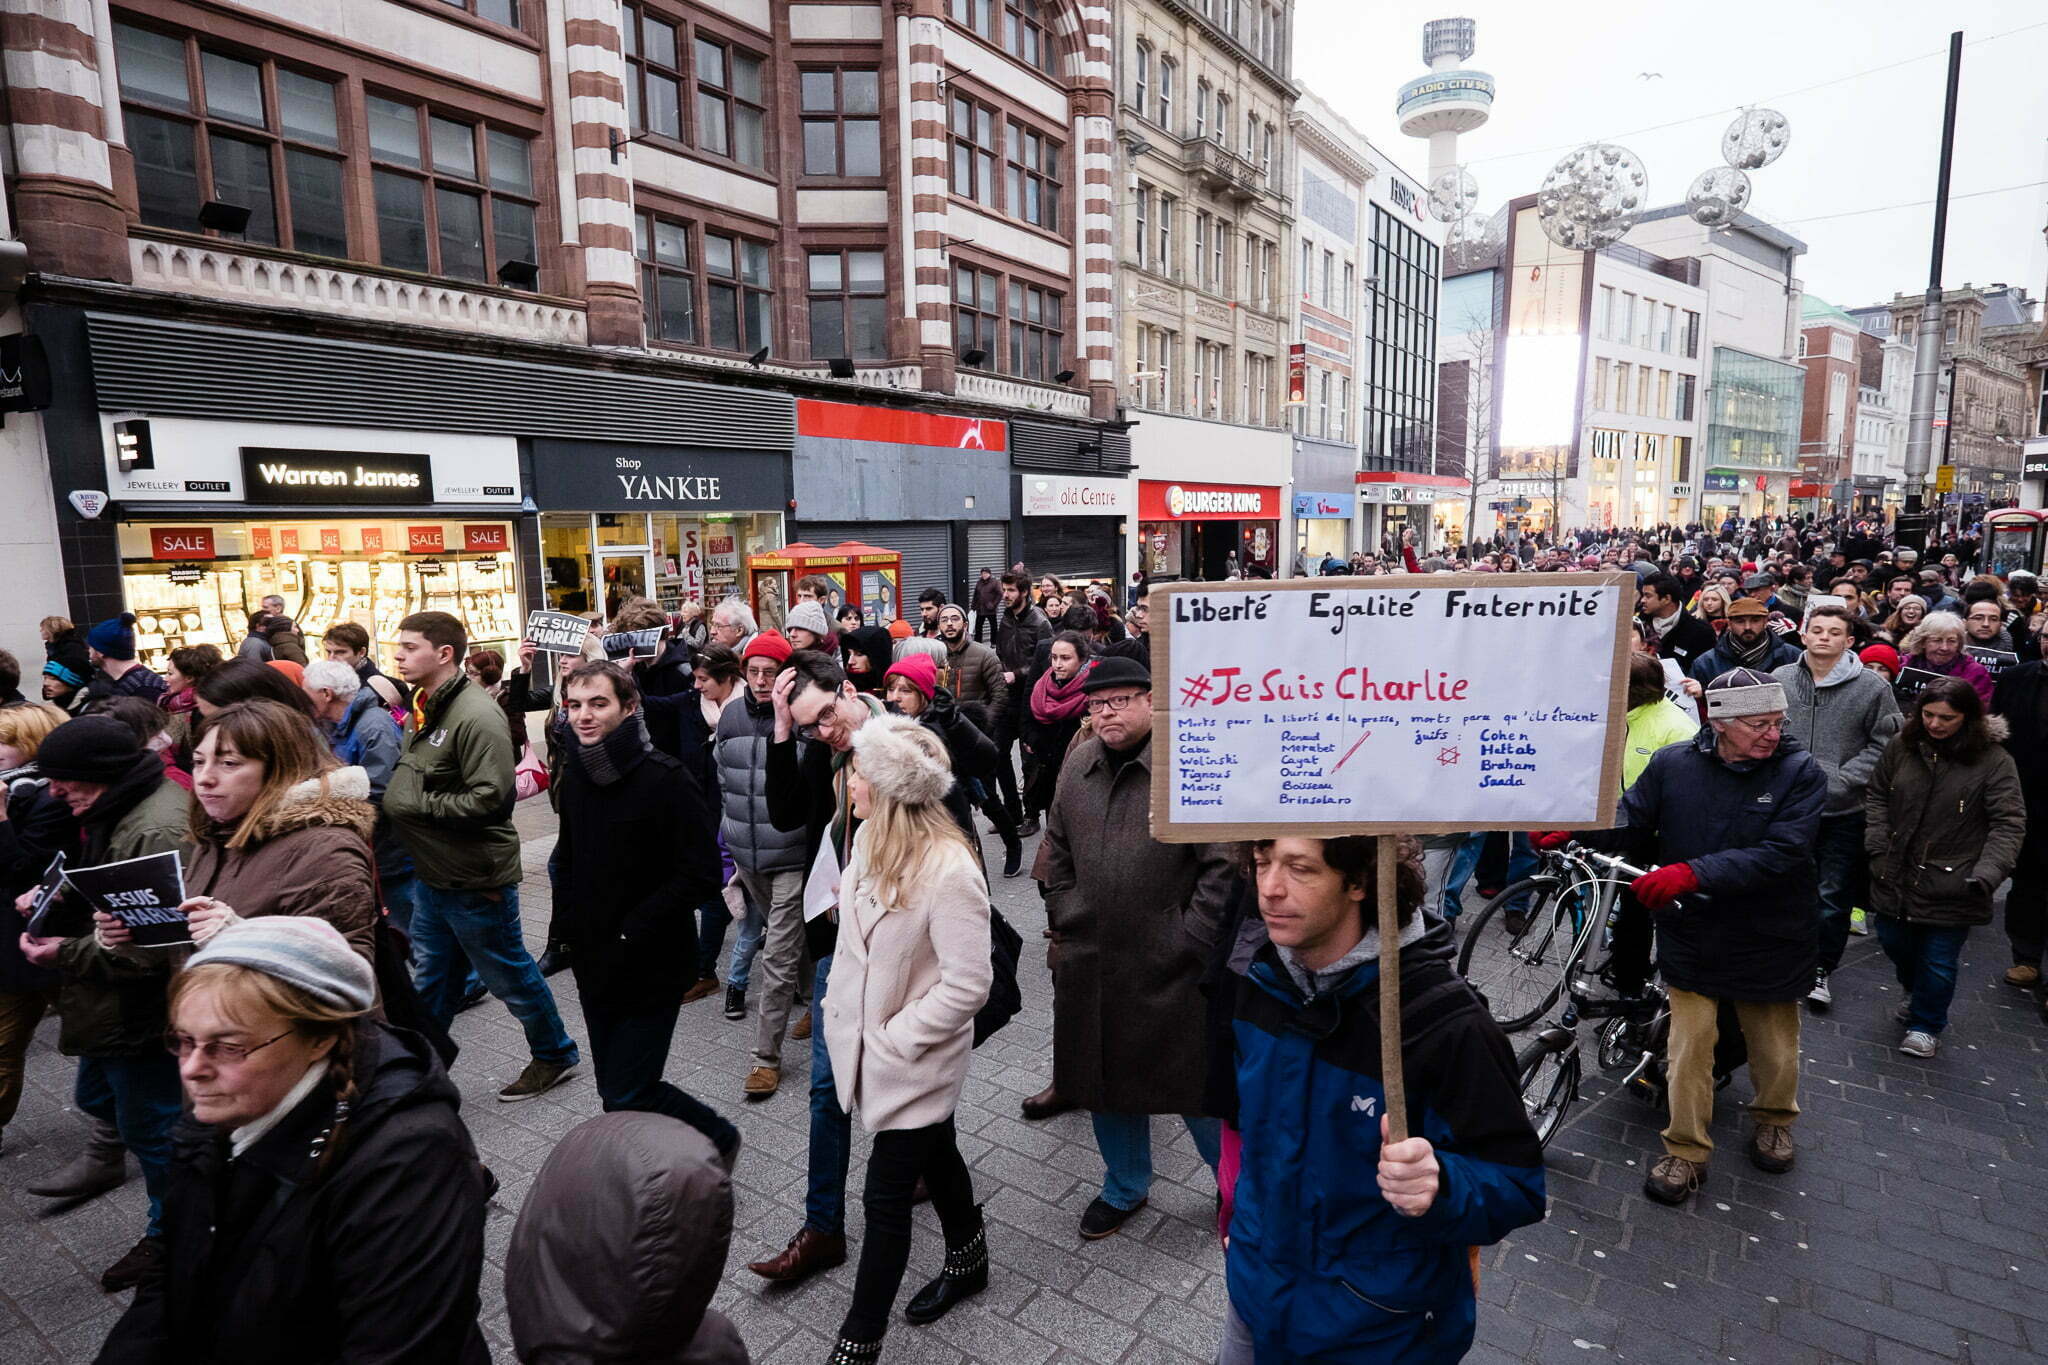 Je suis Charlie rally in Liverpool